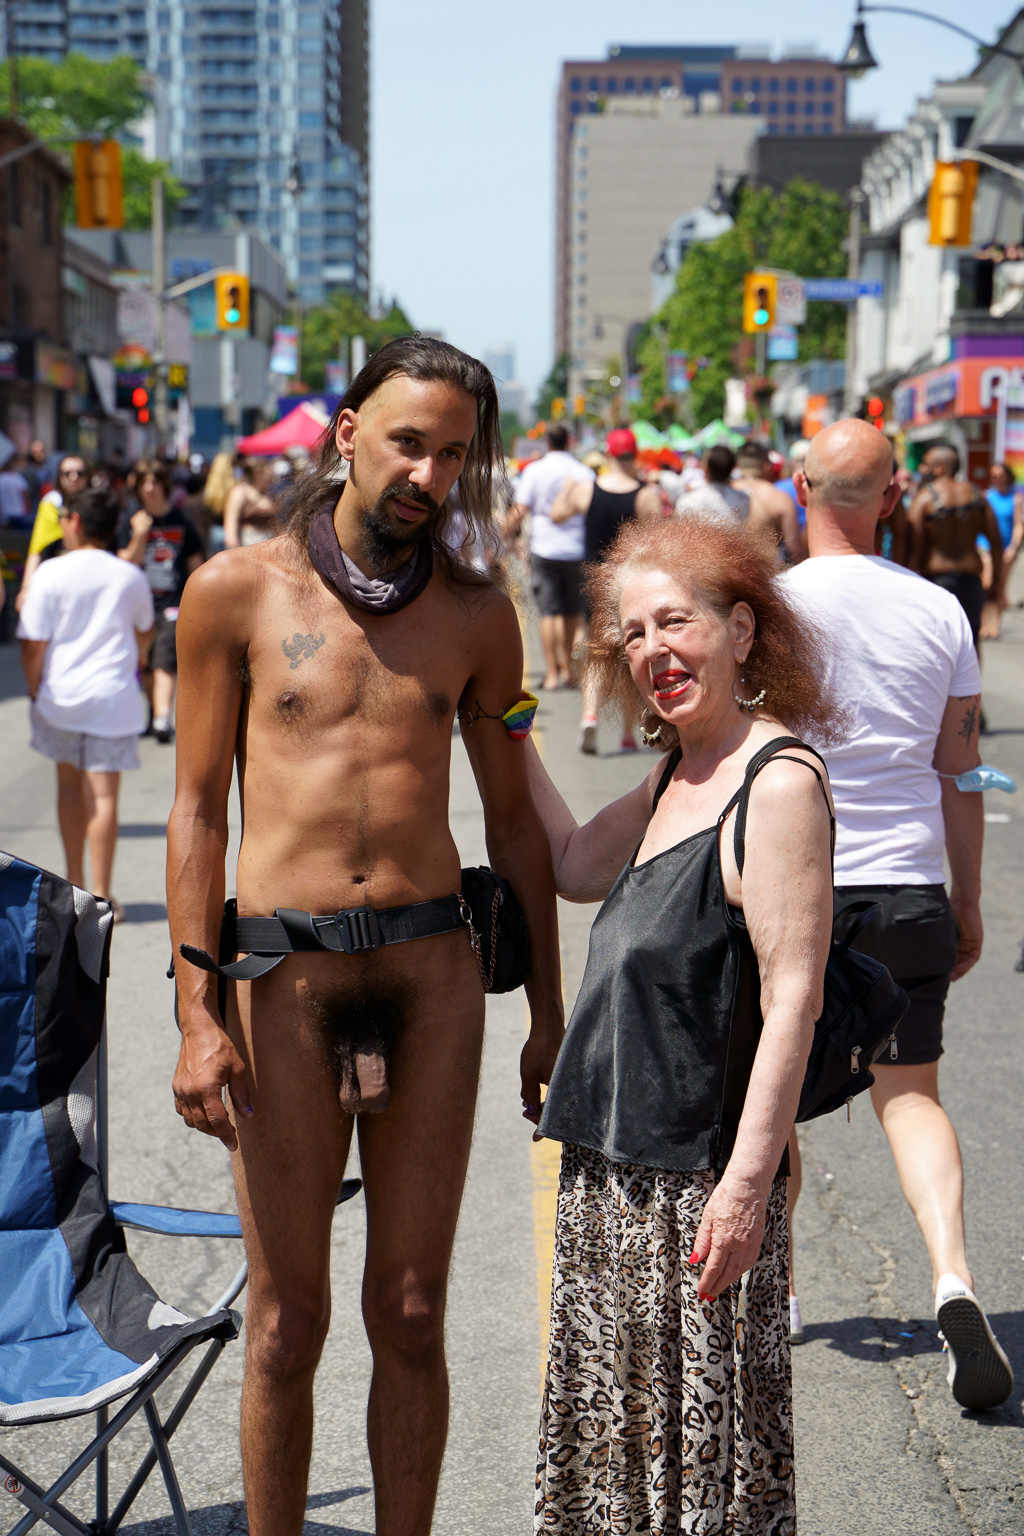 Standing in the middle of Toronto's Church Street, a woman licks her lips while resting a hand on the arm of a man who wears no clothes.